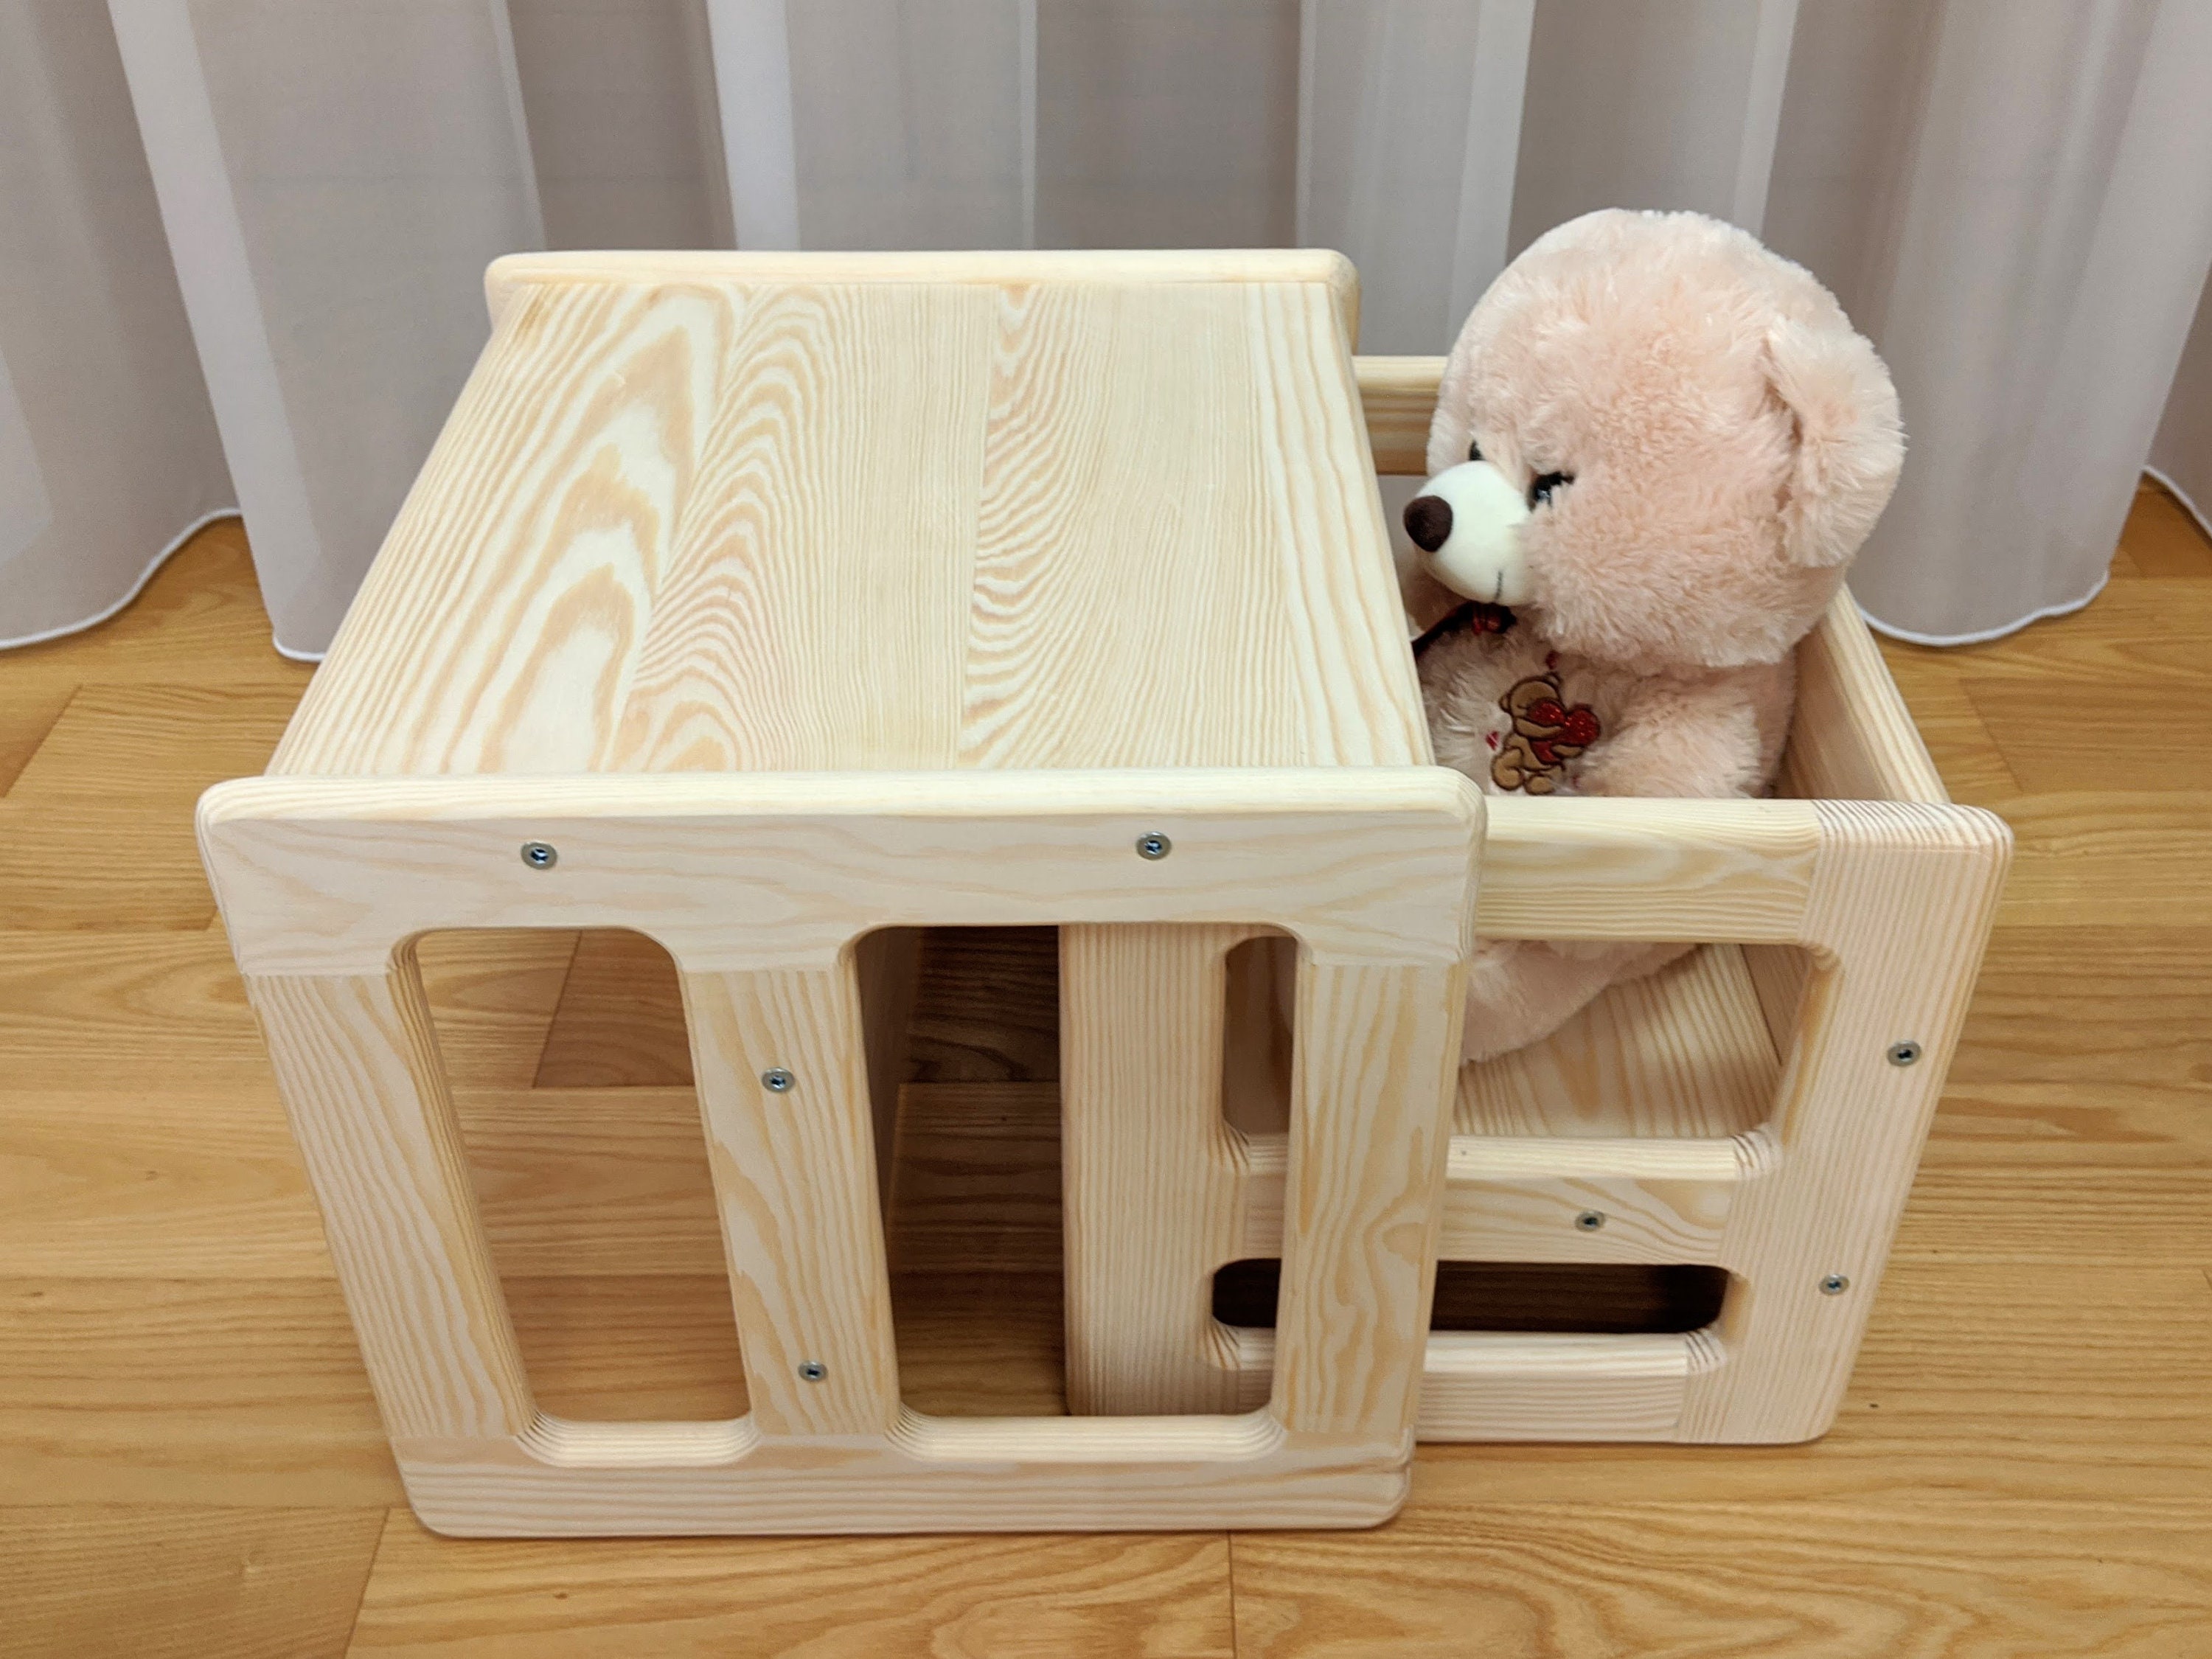 Toddler Chair For Dining Room Table